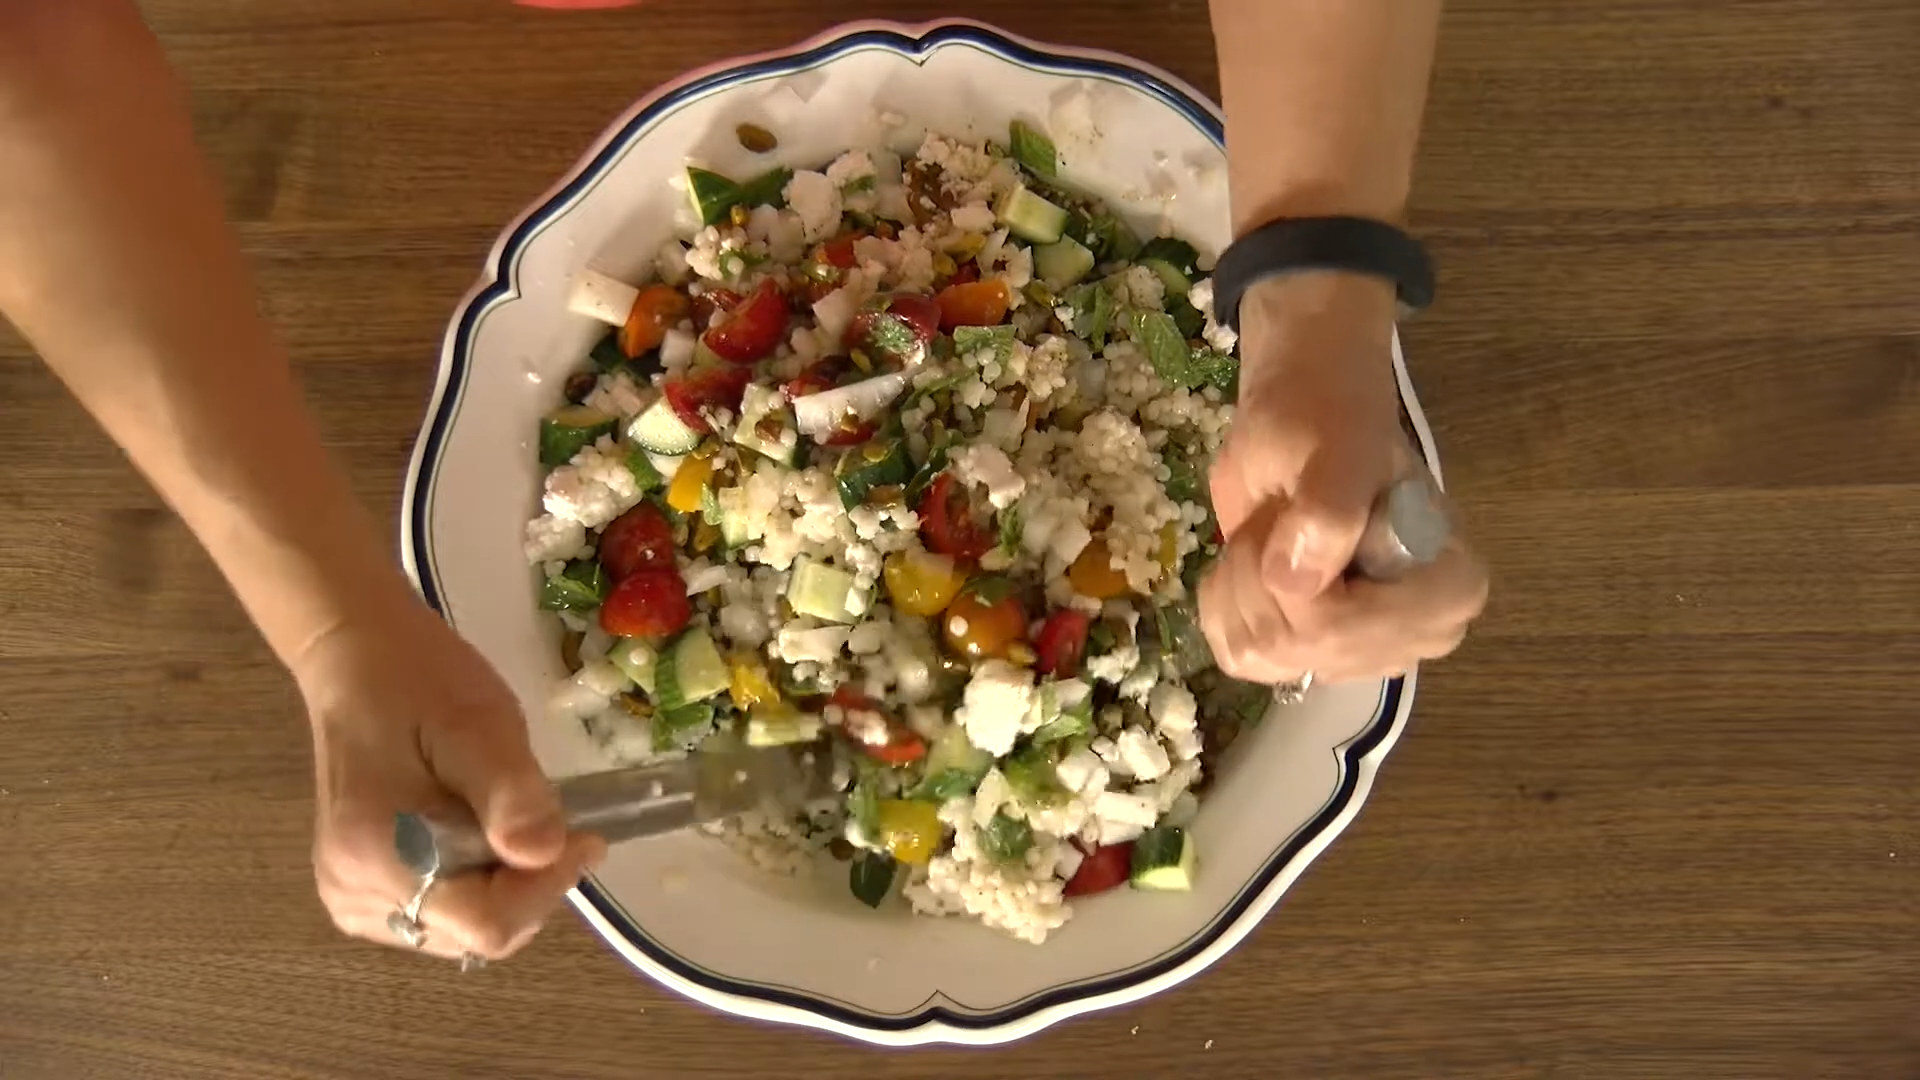 Couscous salad with tomatoes, cucumbers, and feta